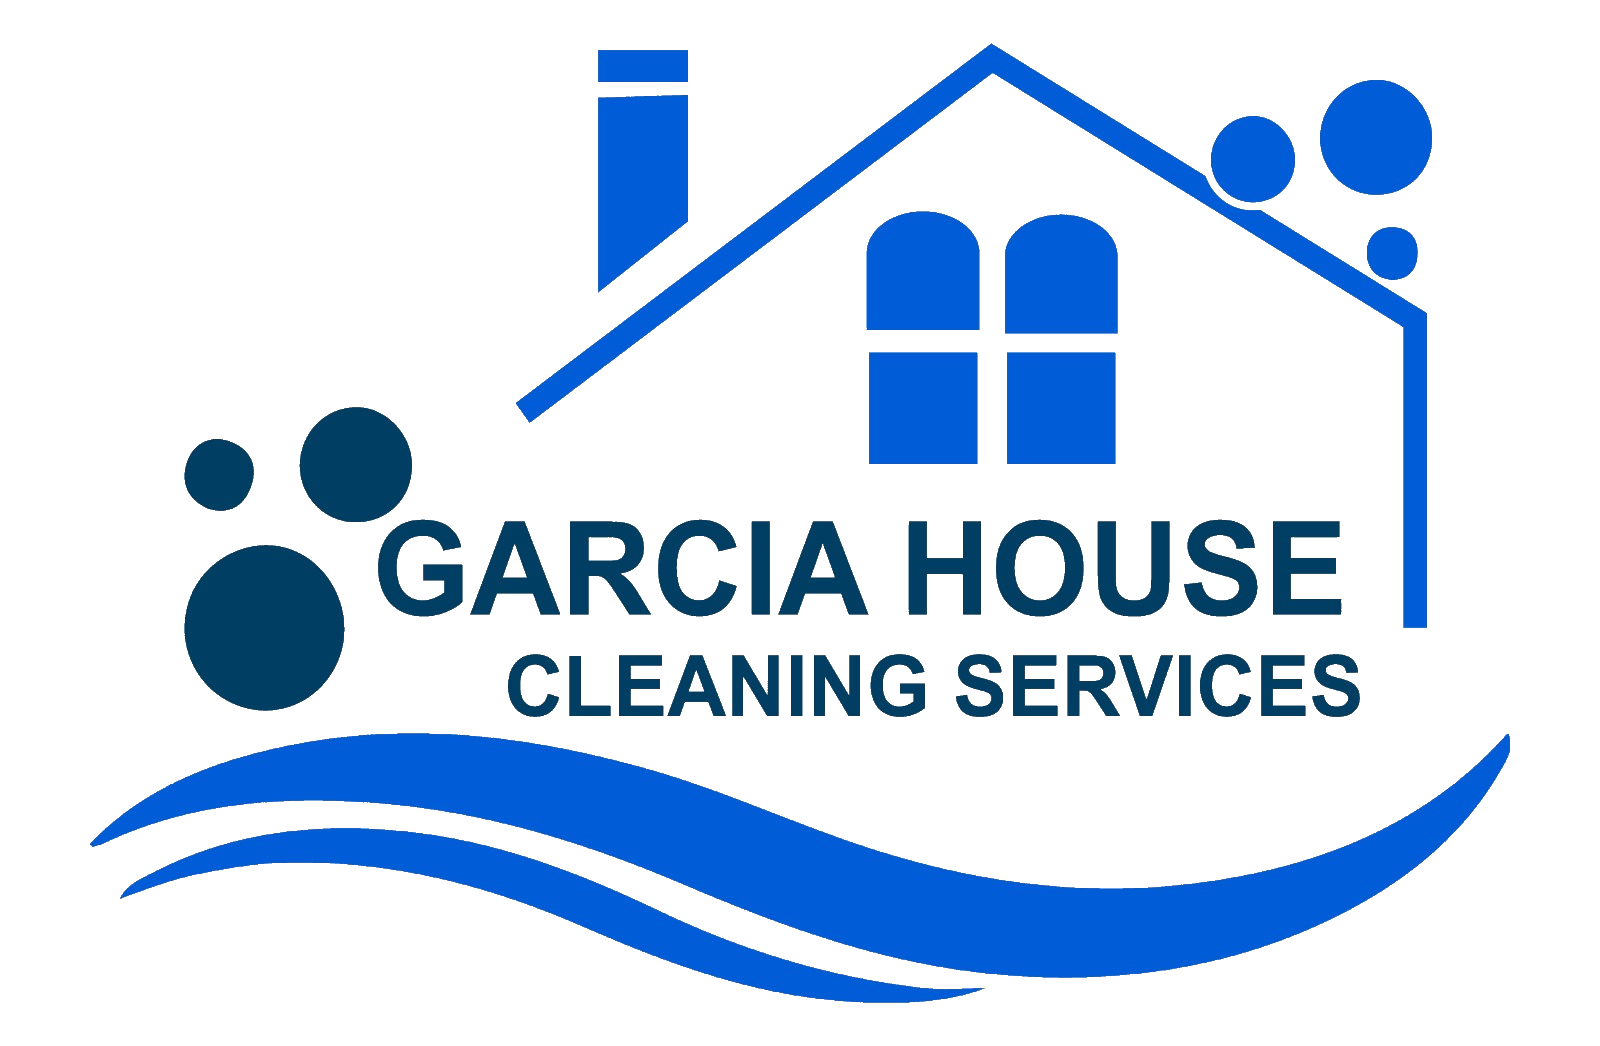 Garcia House Cleaning Services